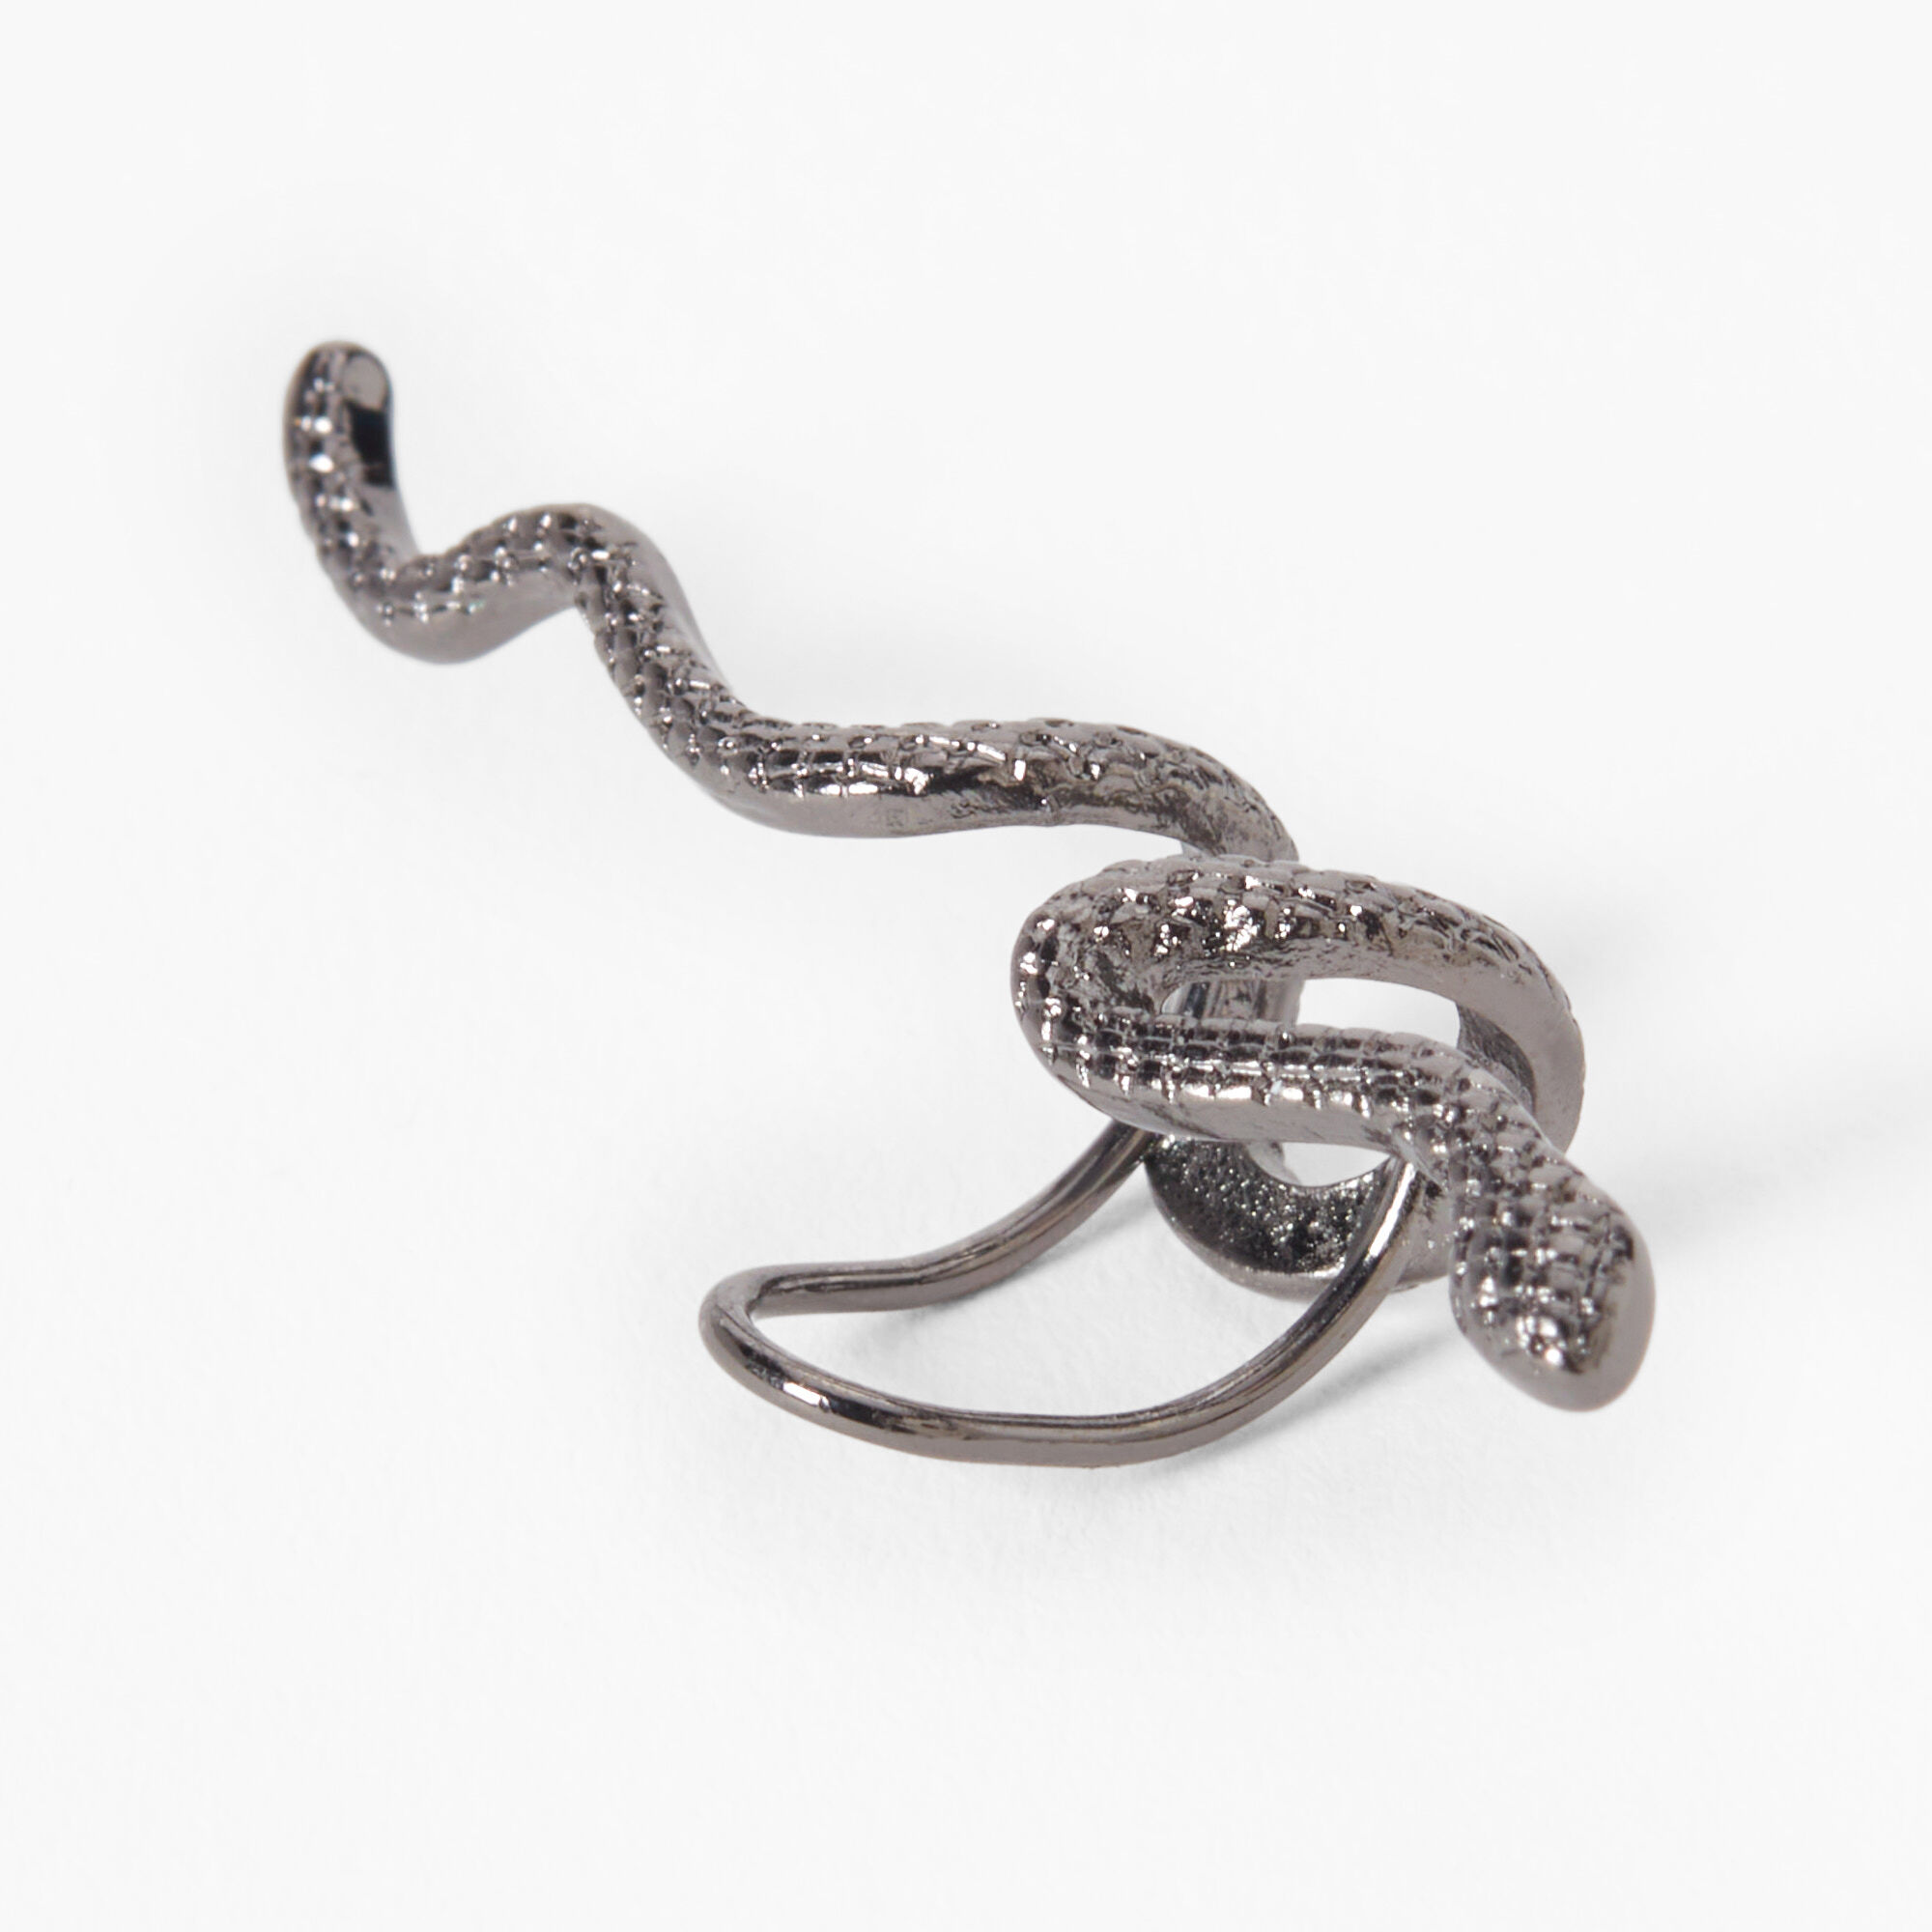 View Claires Hematite Snake Ear Cuff information